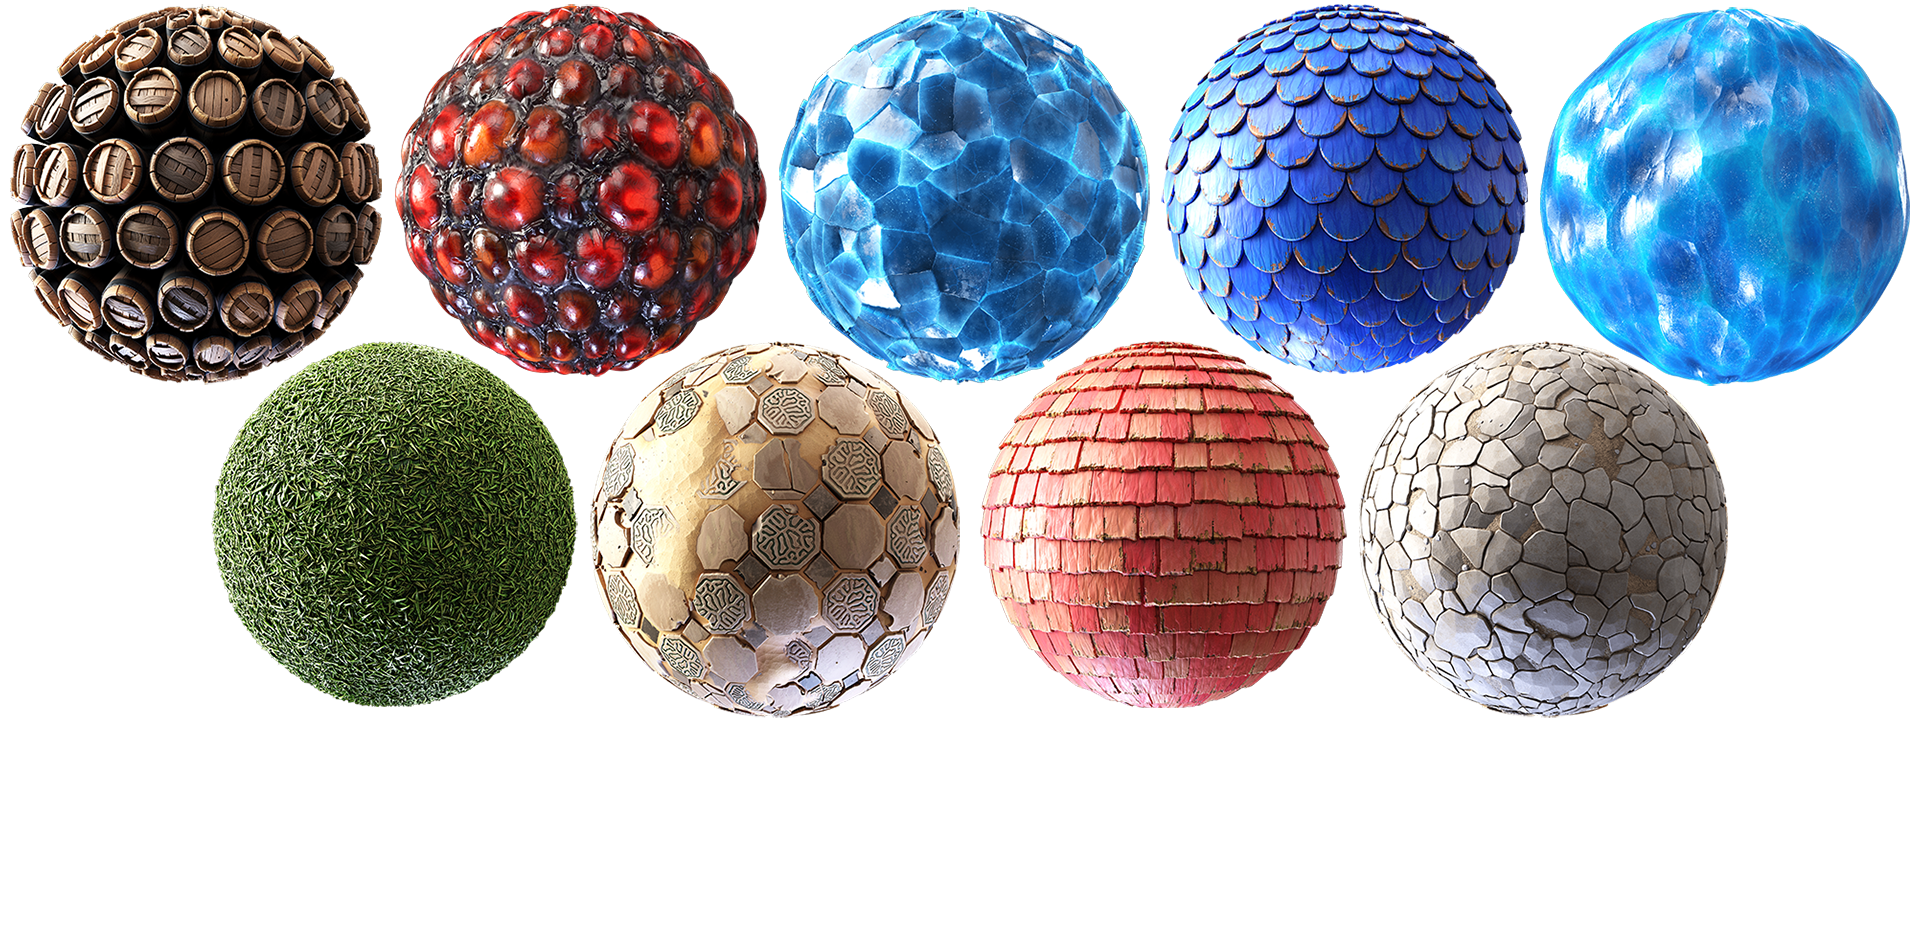 Texture Pack: Stylized 02